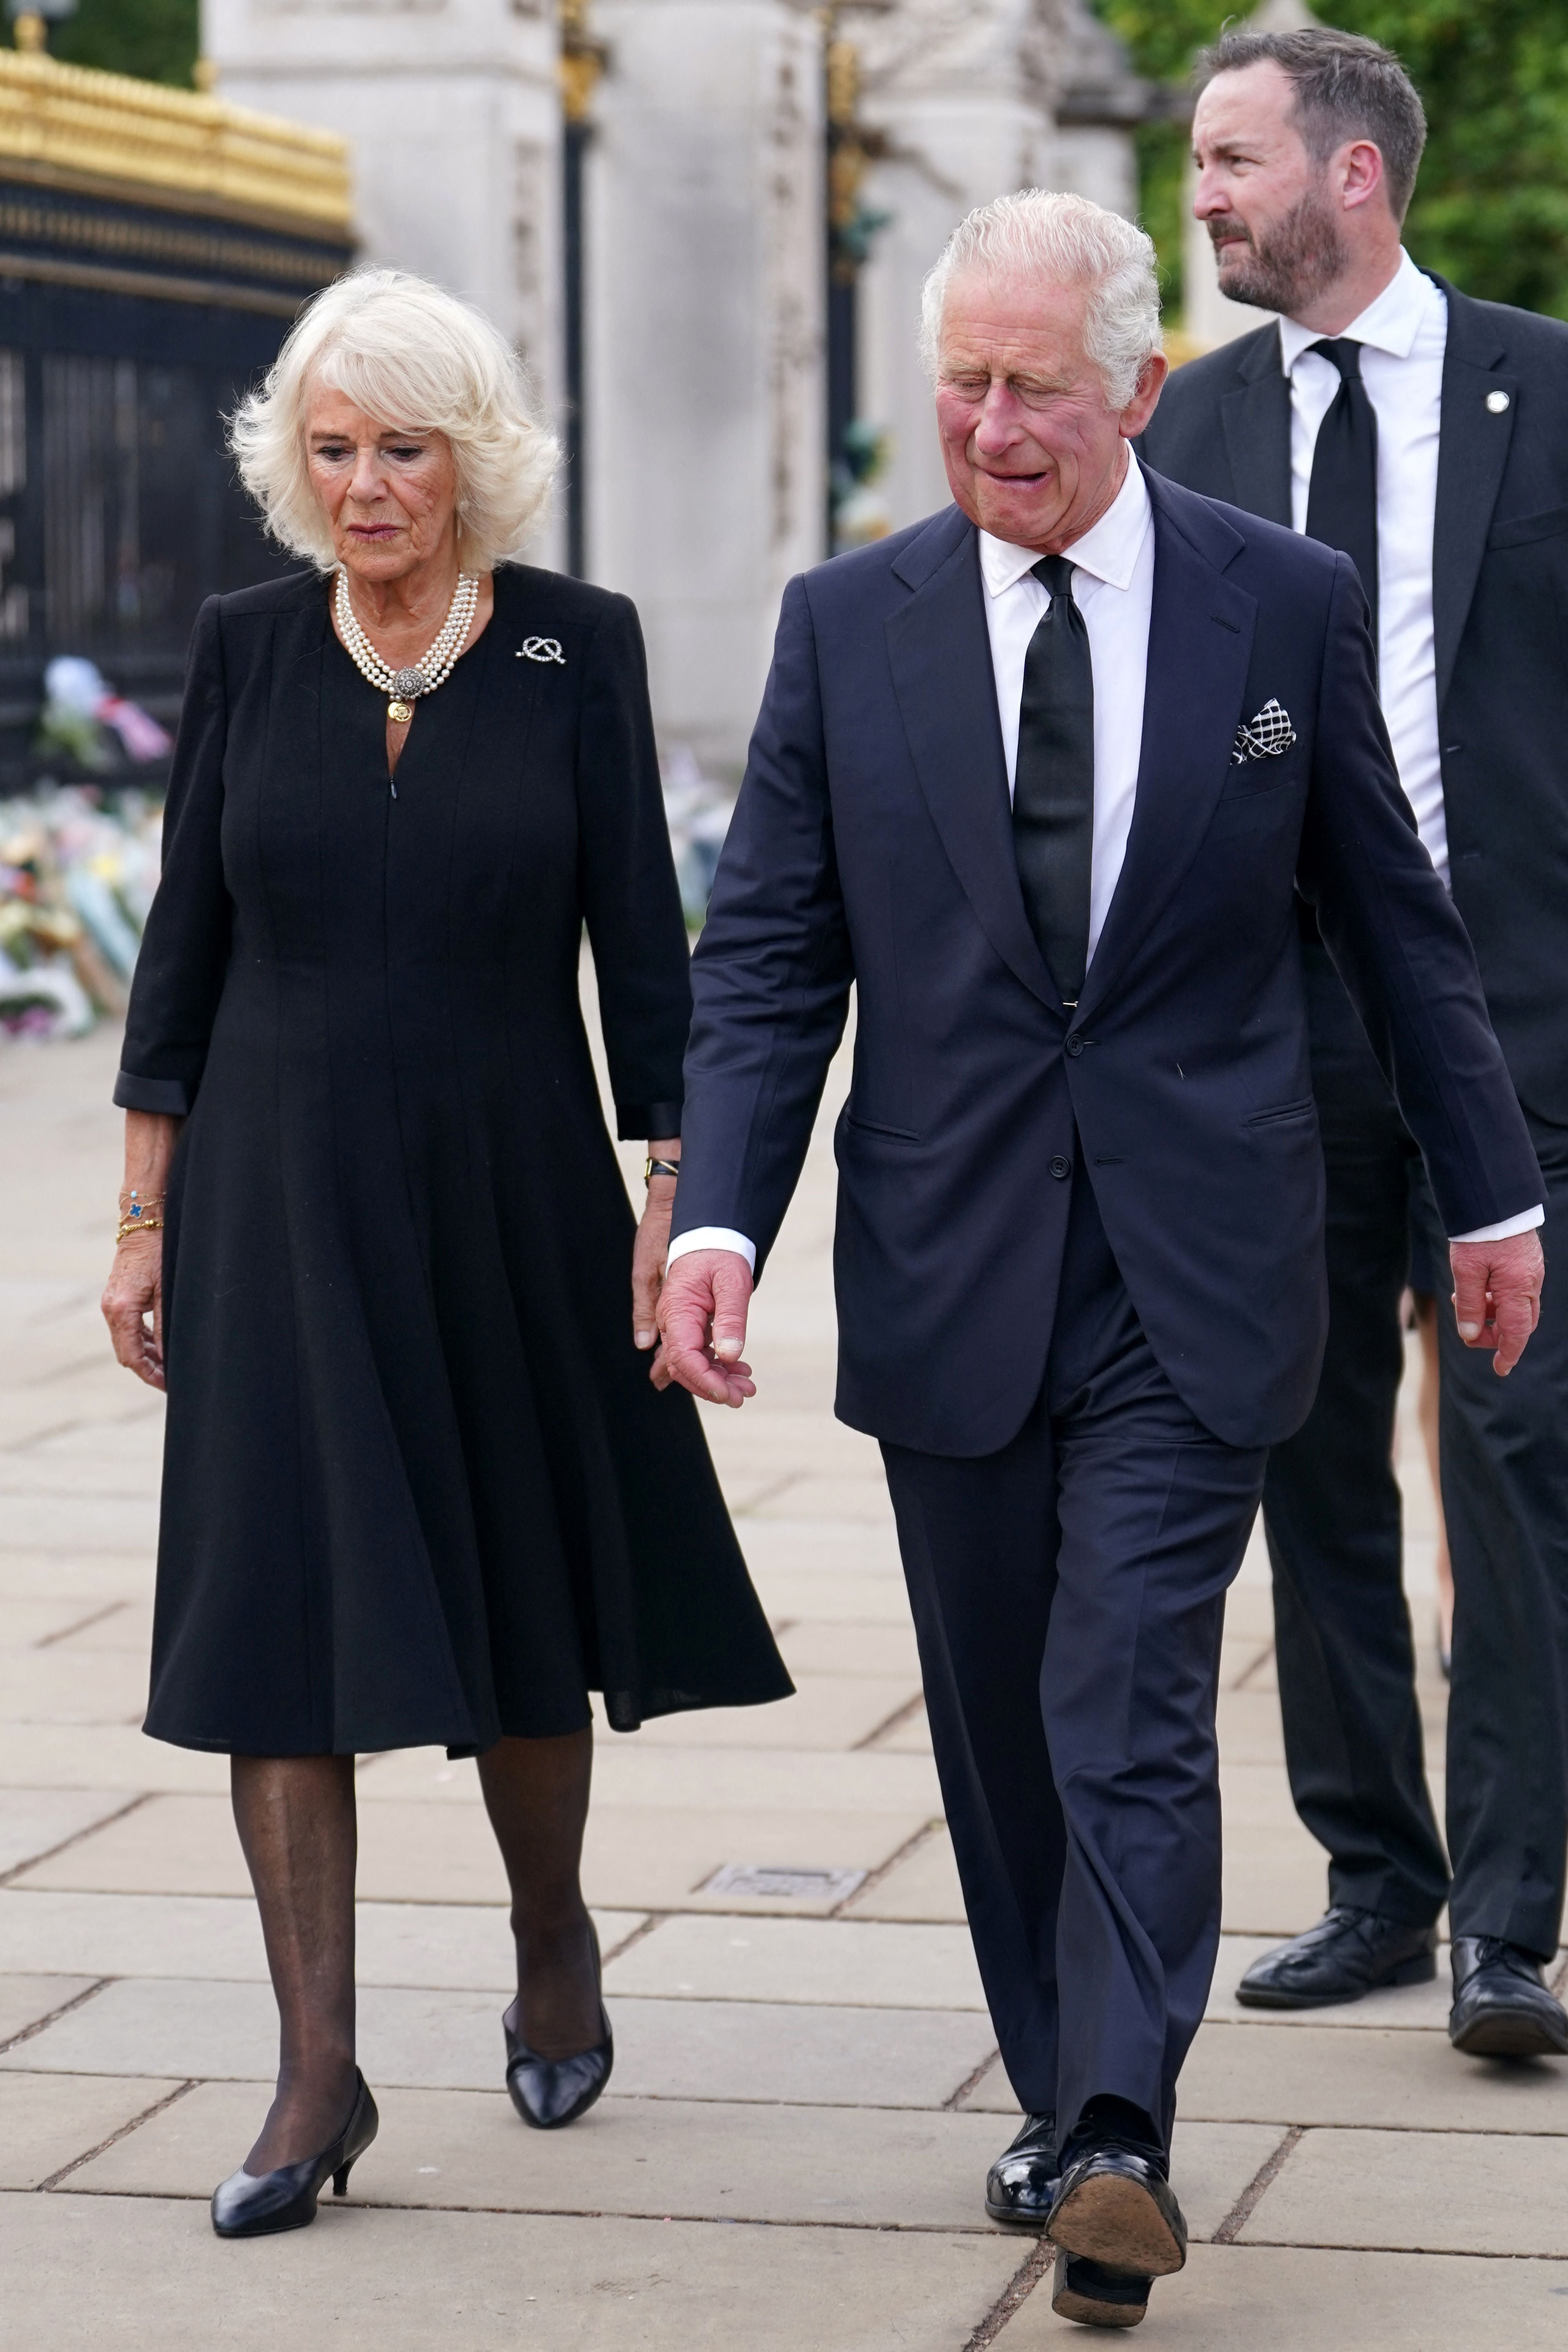 Britain's King Charles III and Britain's Queen Consort Camilla wave to the crowd upon their arrival at Buckingham Palace in London, on September 9, 2022, one day after Queen Elizabeth II died at the age of 96 years.